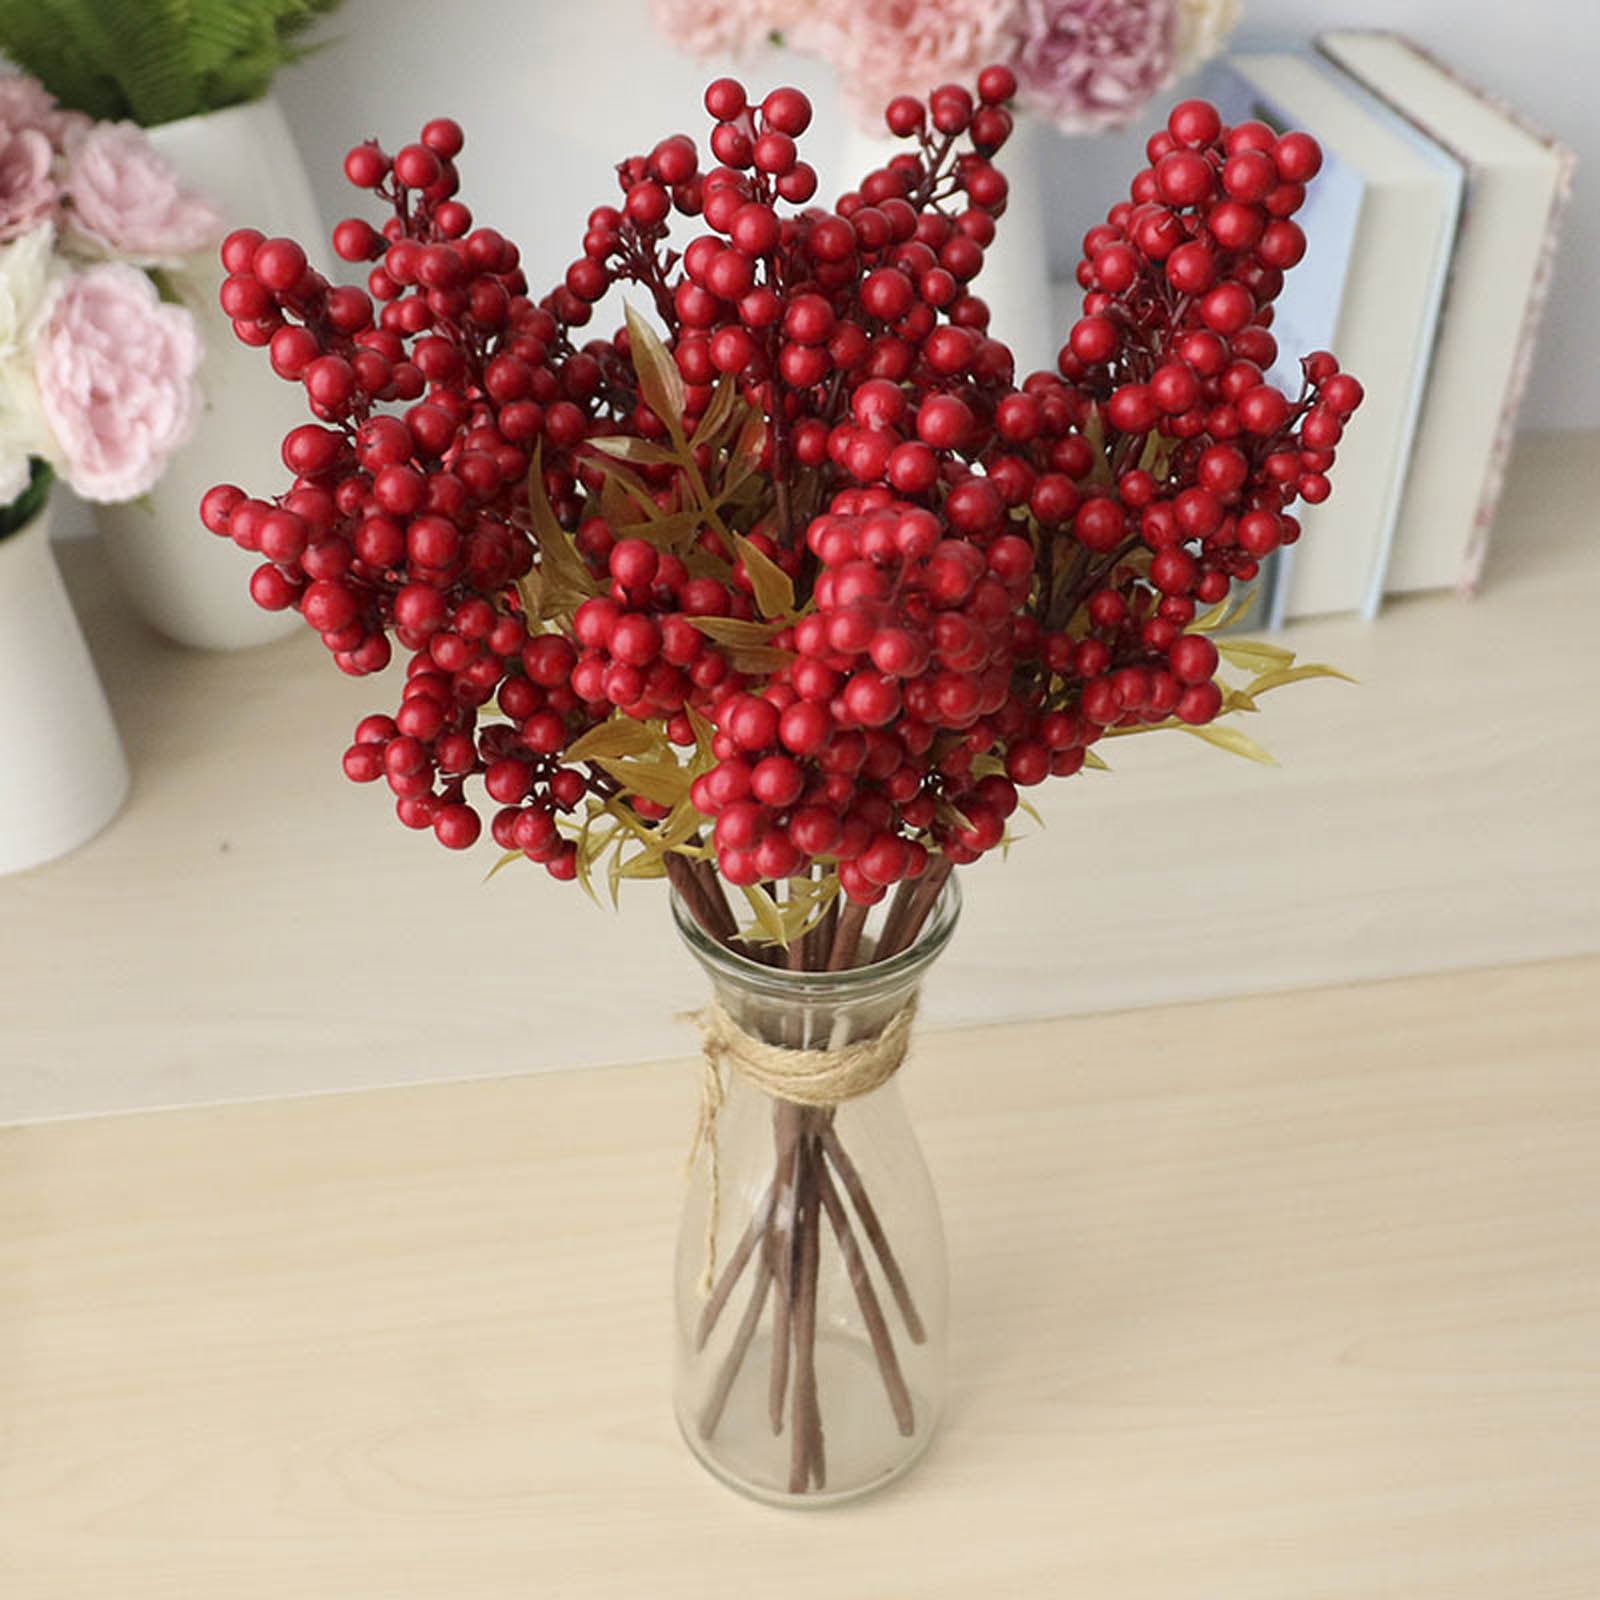 Artificial Red Berry Flower Christmas Decor Branch Home Holly Xmas Crafts Stems 